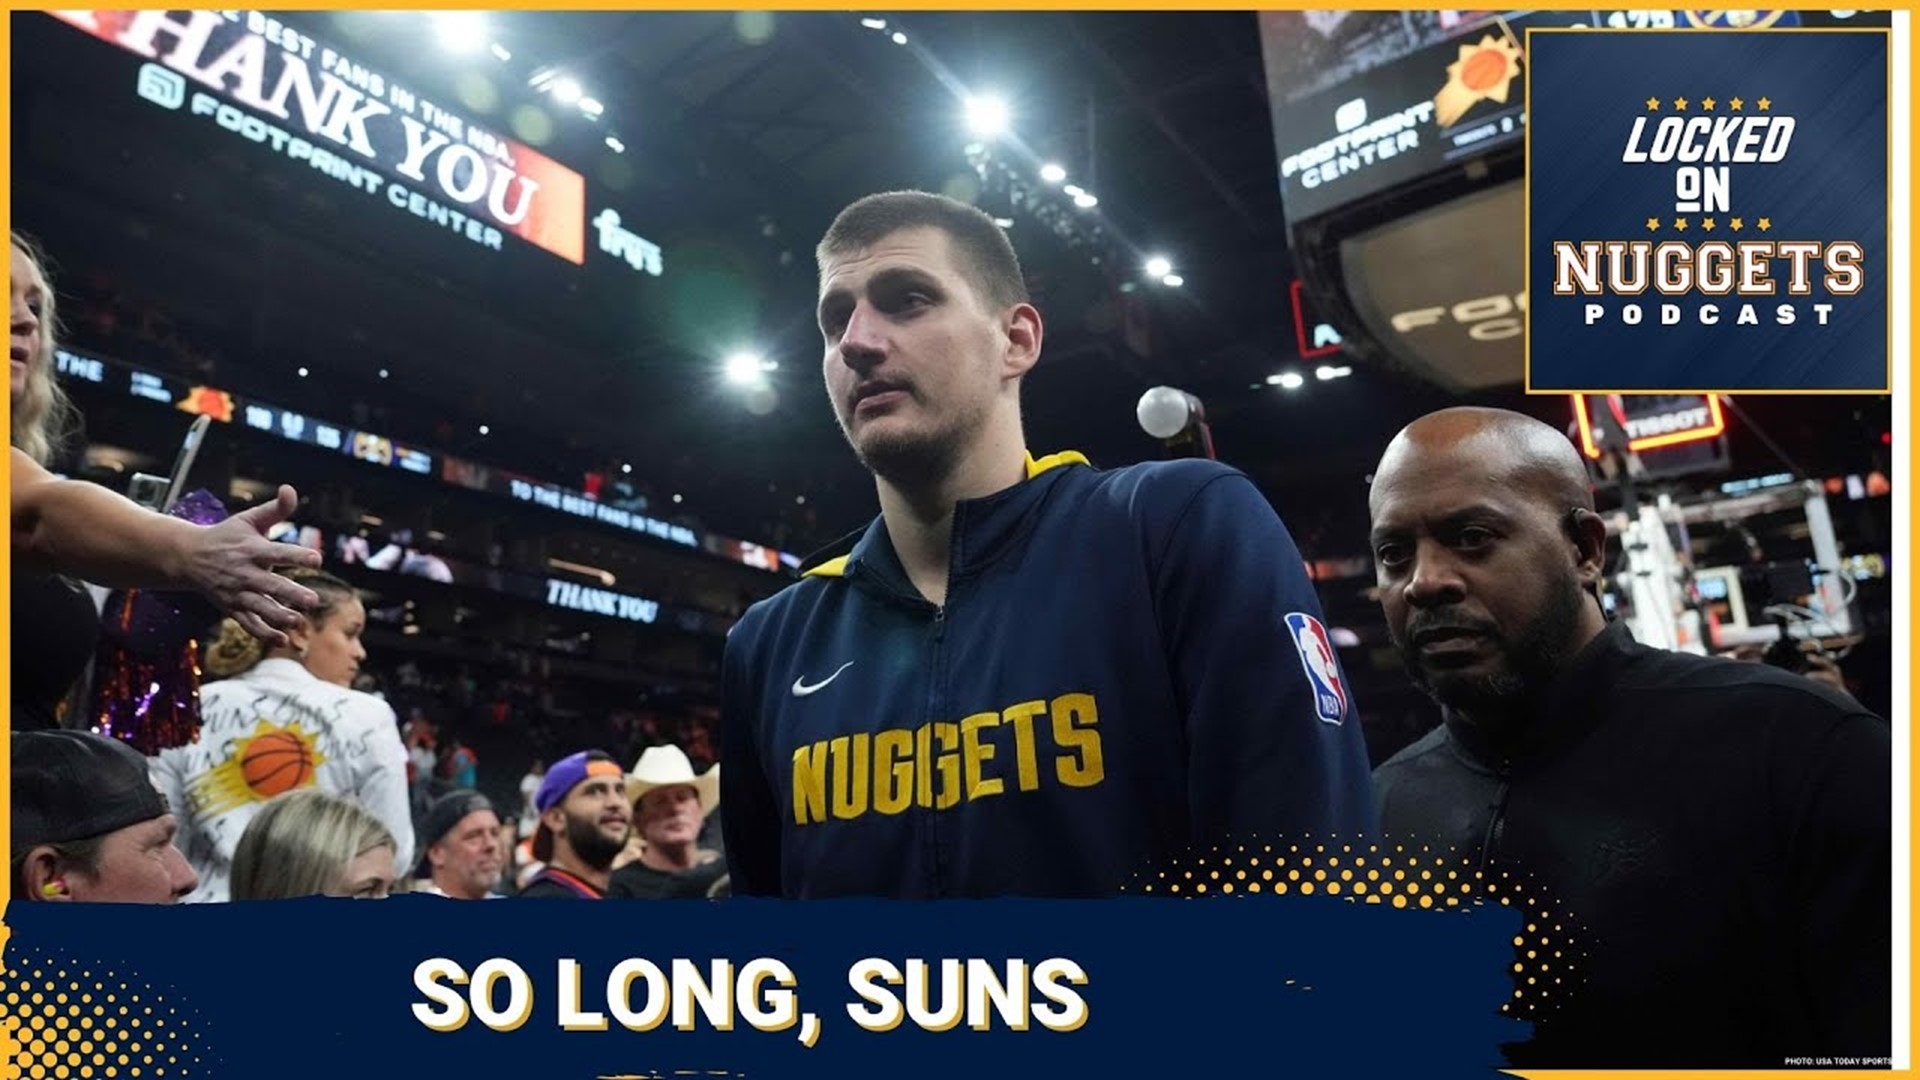 The Denver Nuggets gave their fans an incredibly satisfying Game 6 blowout win to eliminate the Suns. Jokic is the best in the world